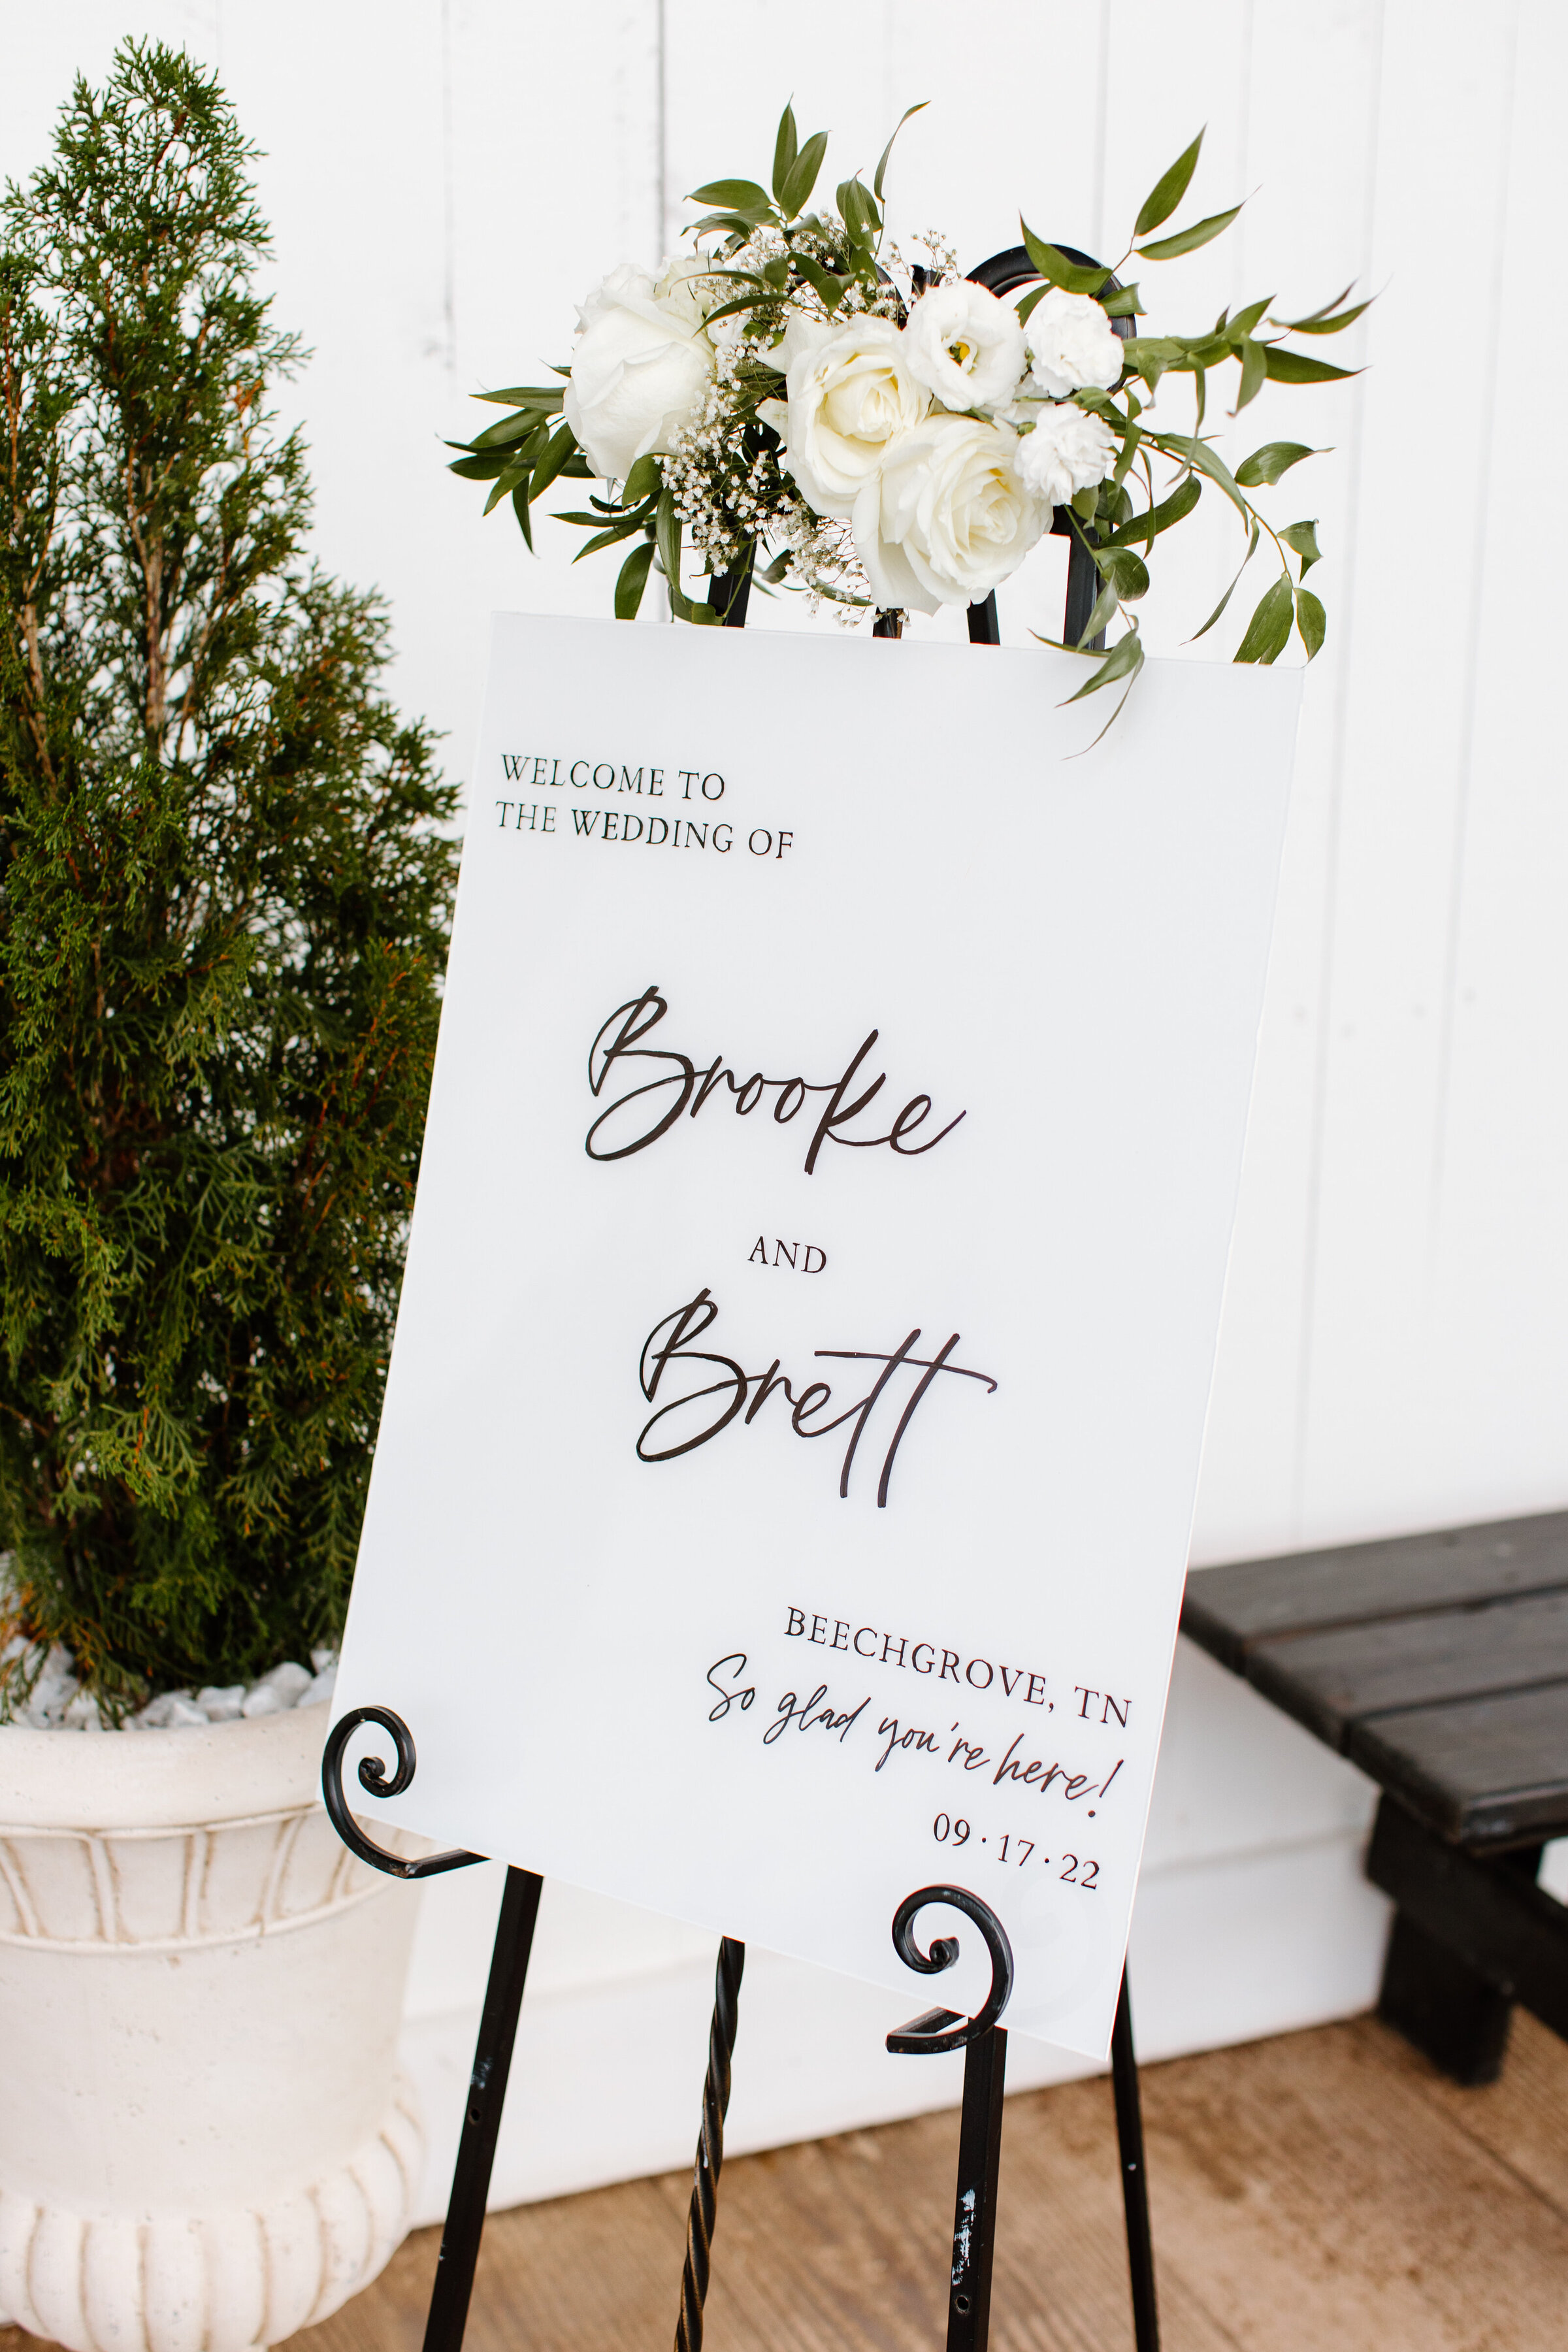 Sign welcoming guests to wedding at White Dove Barn